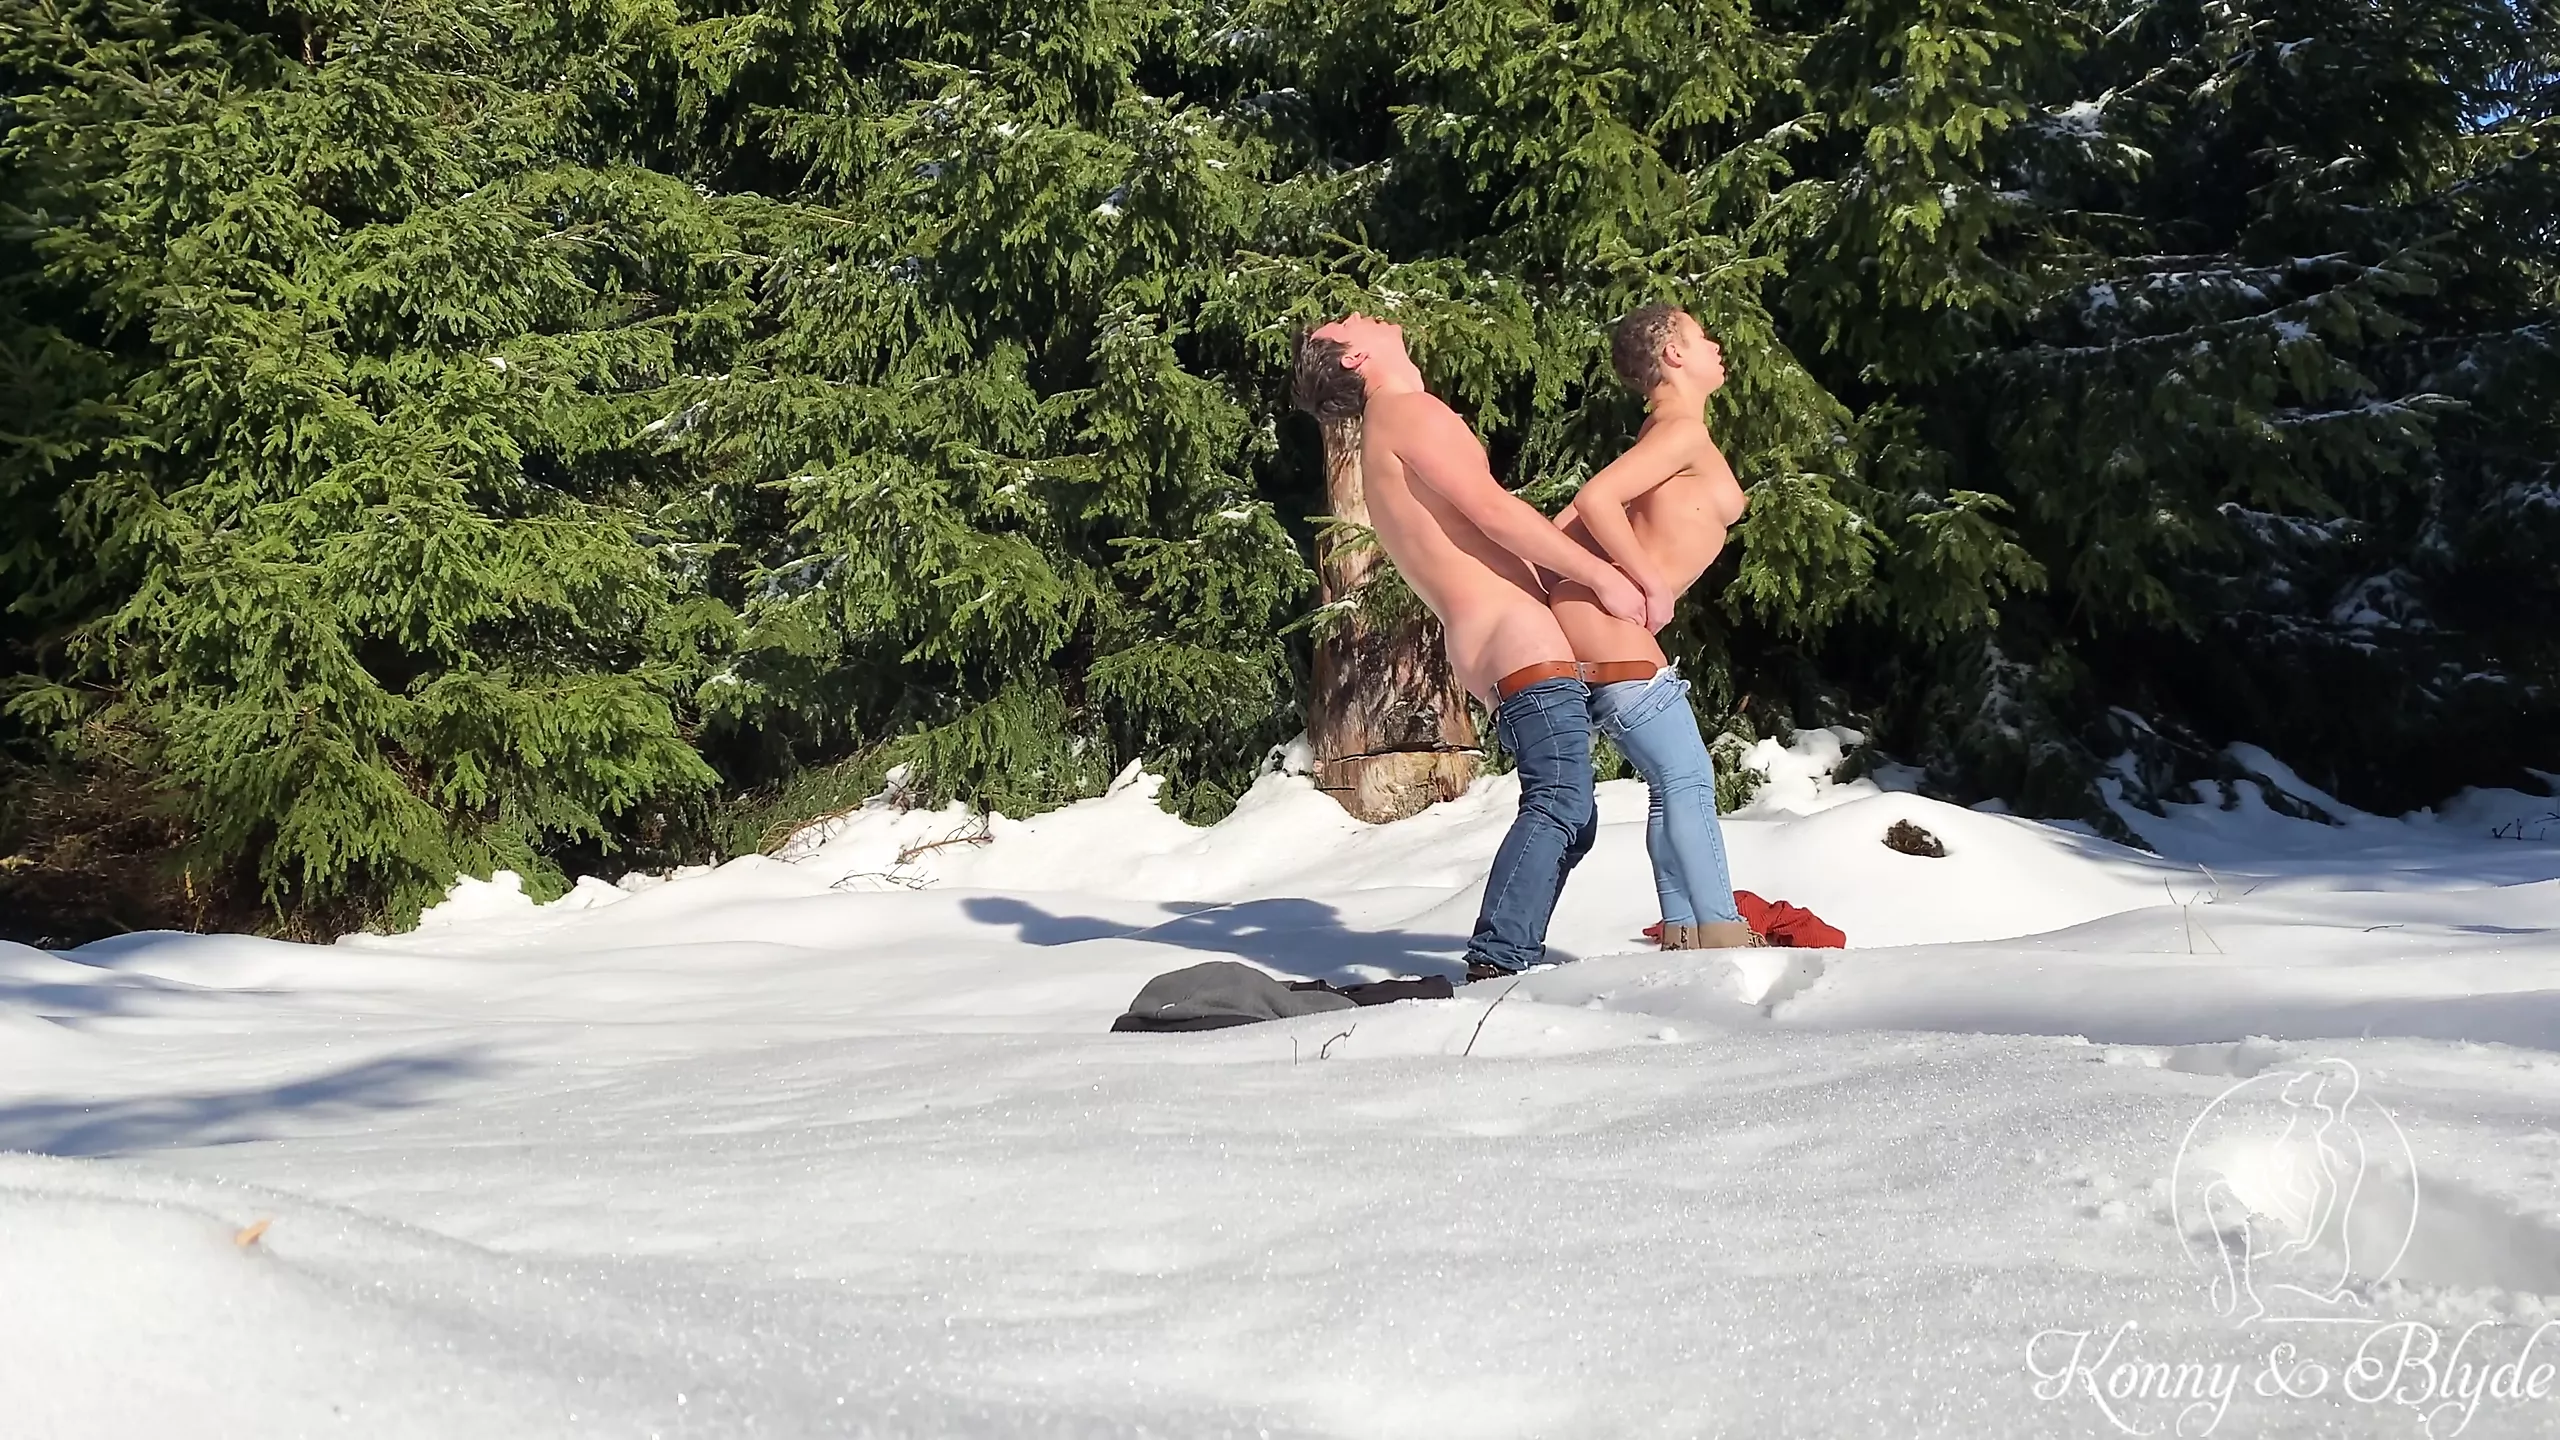 Konny and Blyde having sex in a snowy winter forest in public